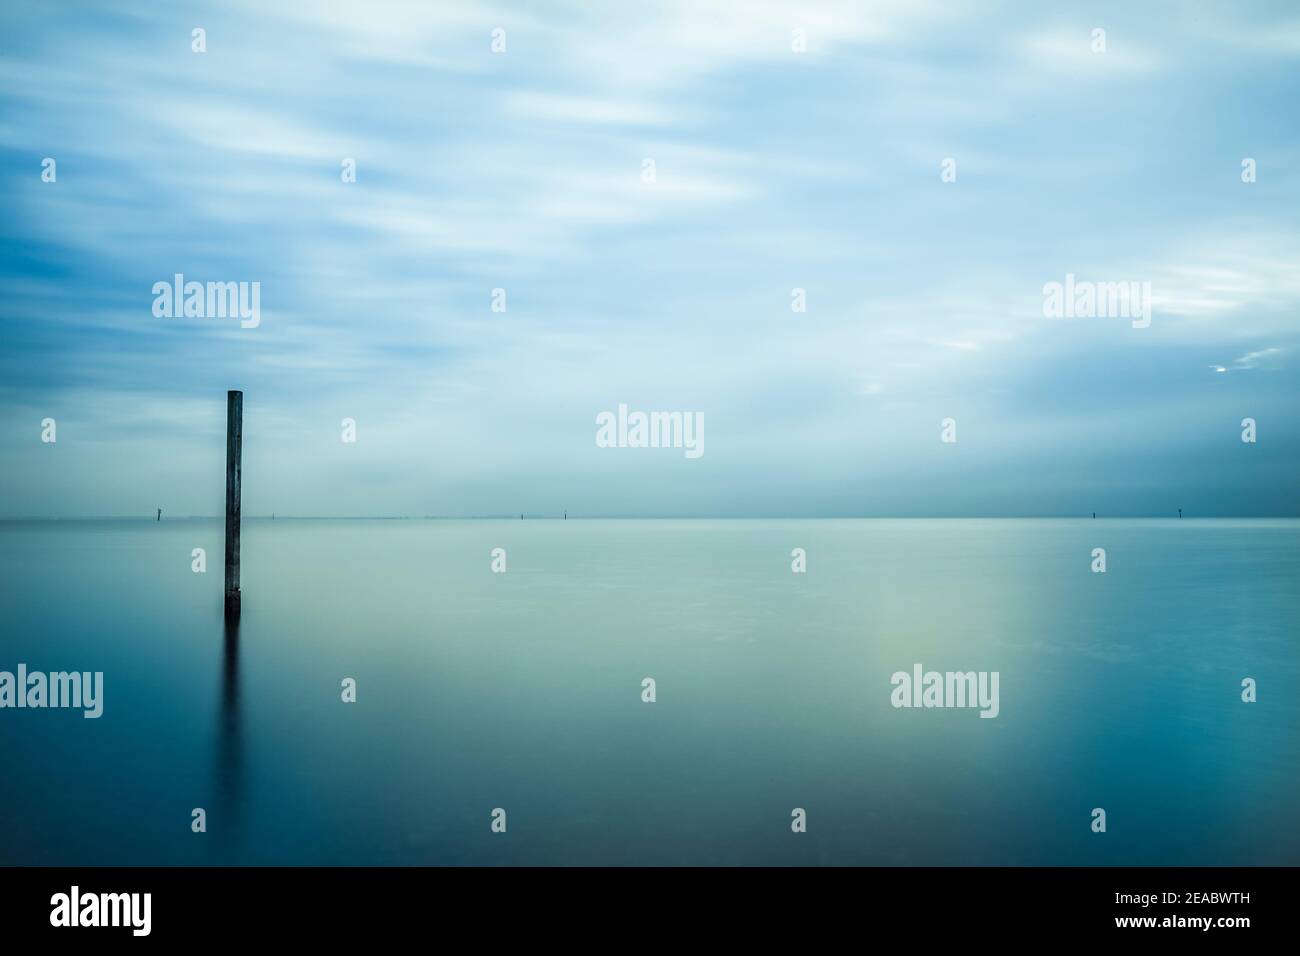 Horizon over water with blurred water surface Stock Photo